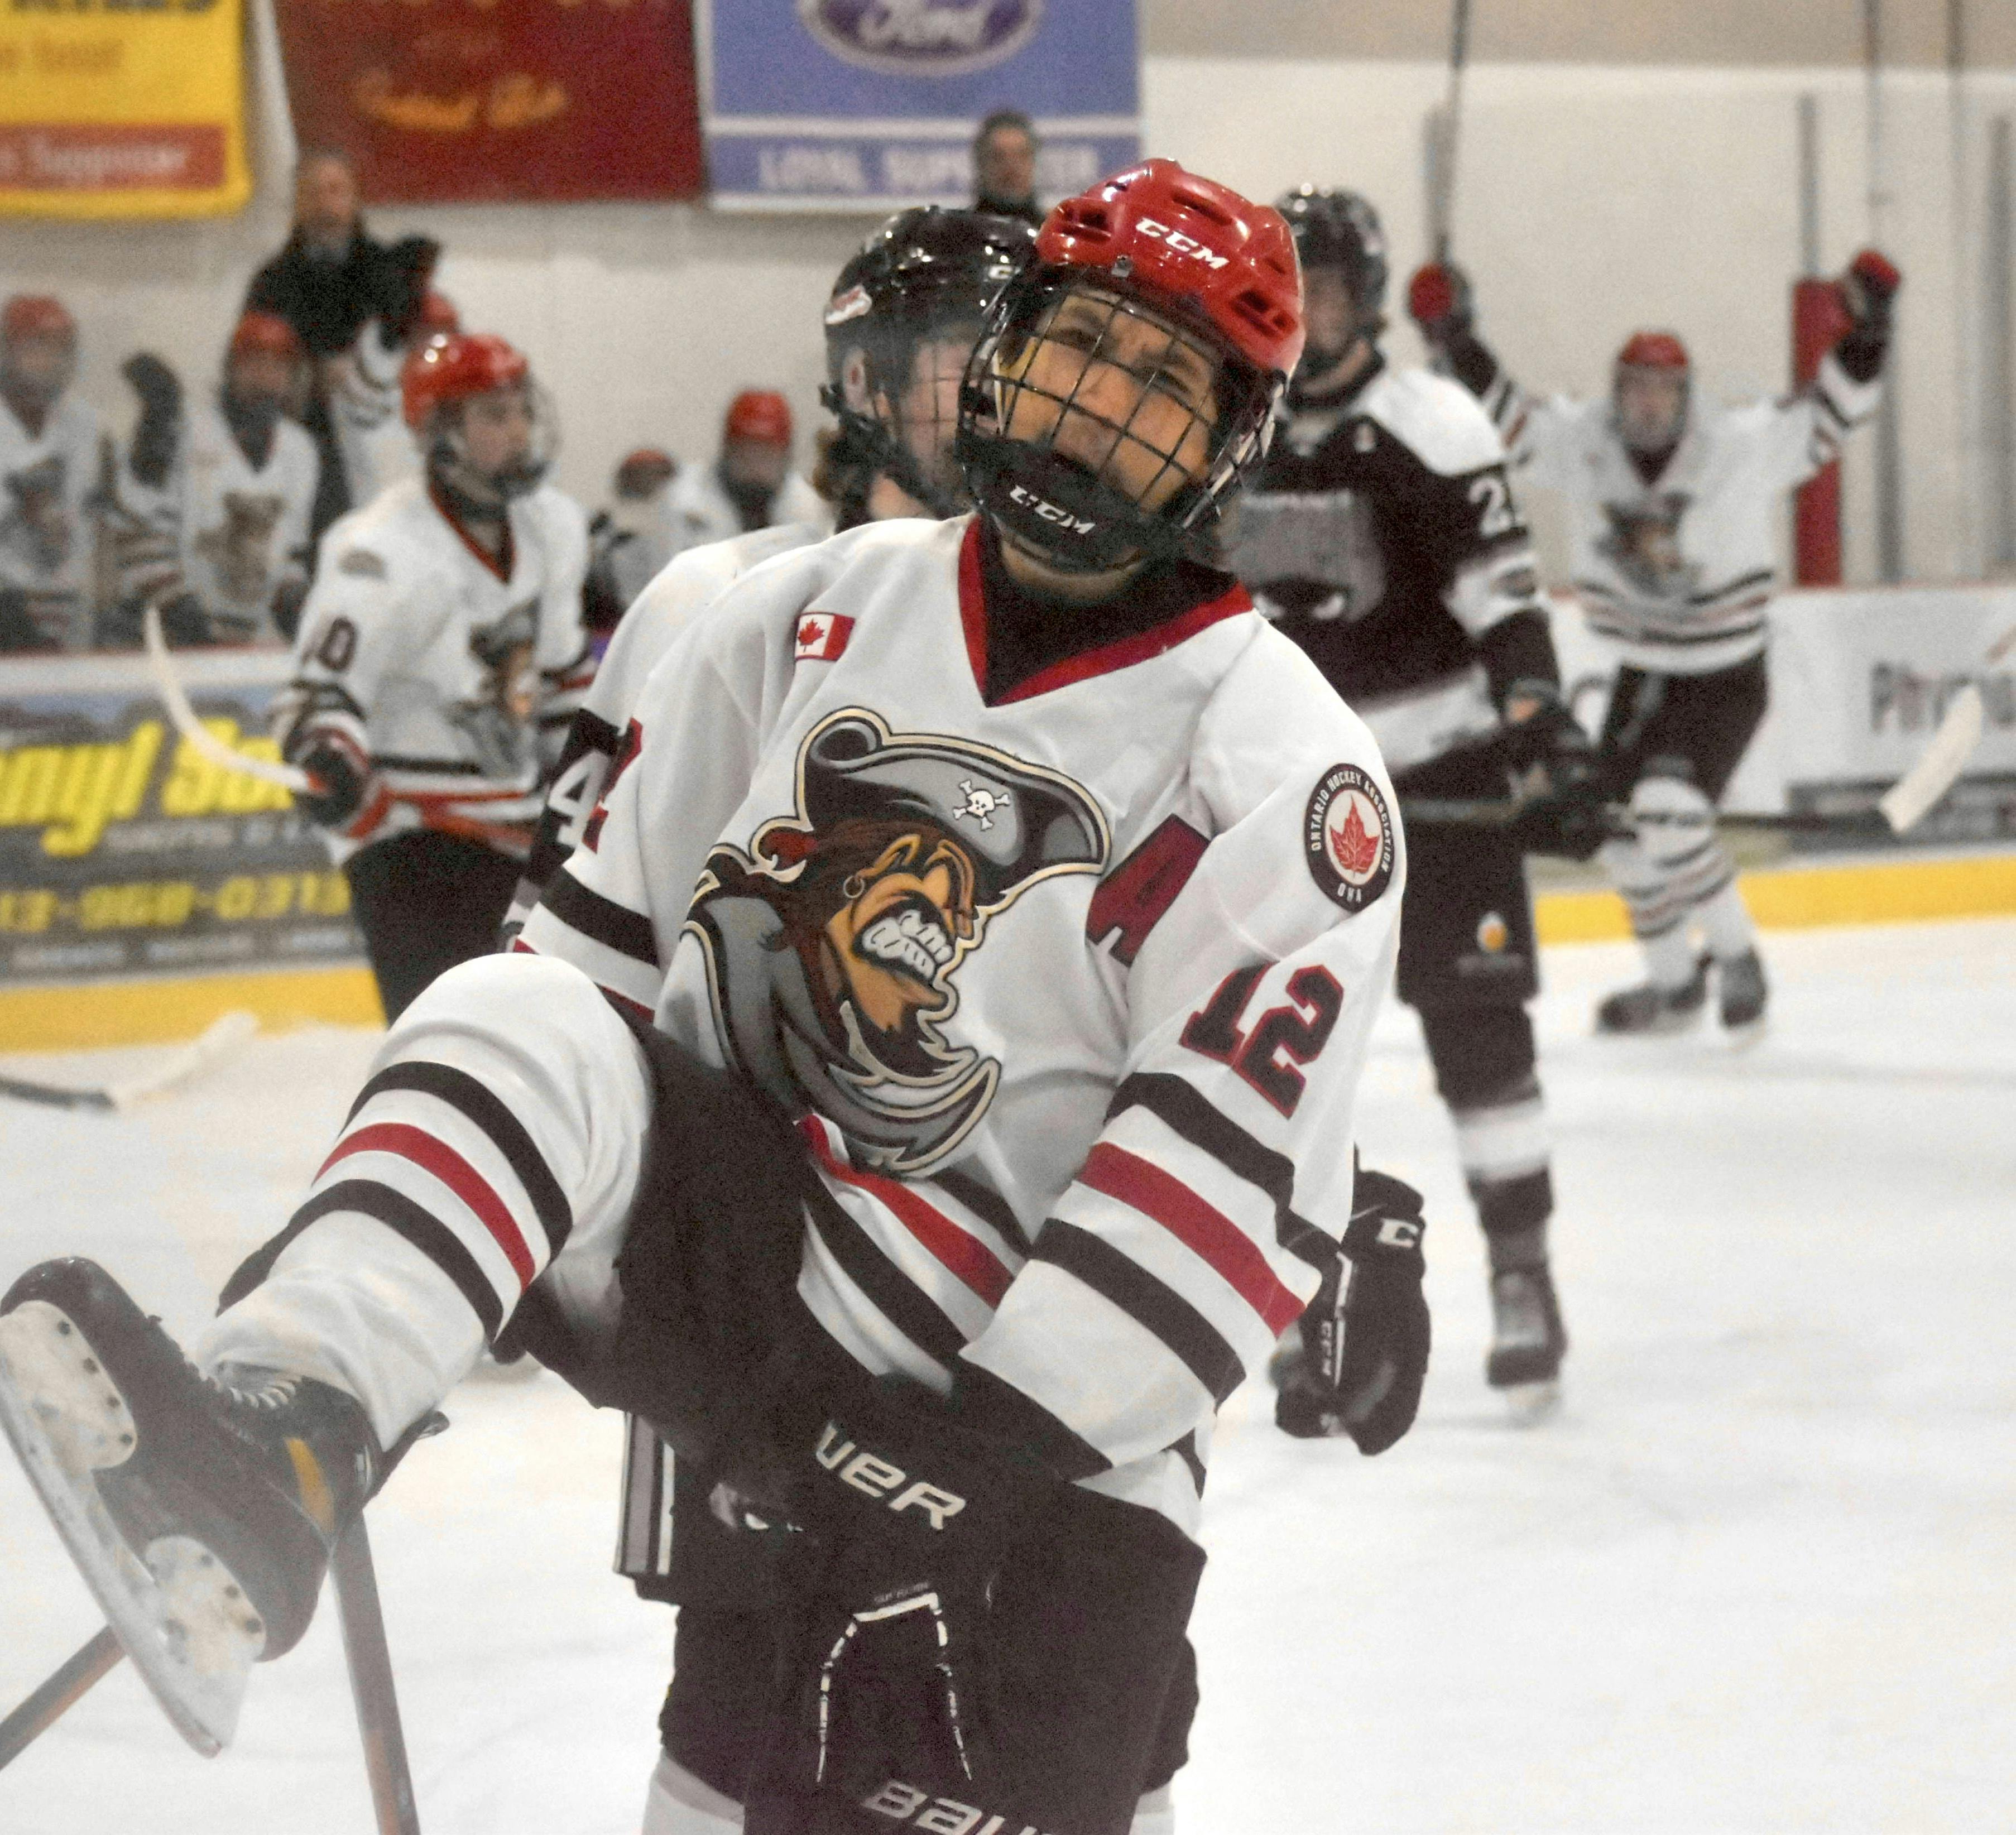 <p>Nick Kirby had a second period goal to help lift his Picton Pirates to a 5-2 win over the visiting Napanee Raiders Thursday night. (Jason Parks/Gazette Staff)</p>
